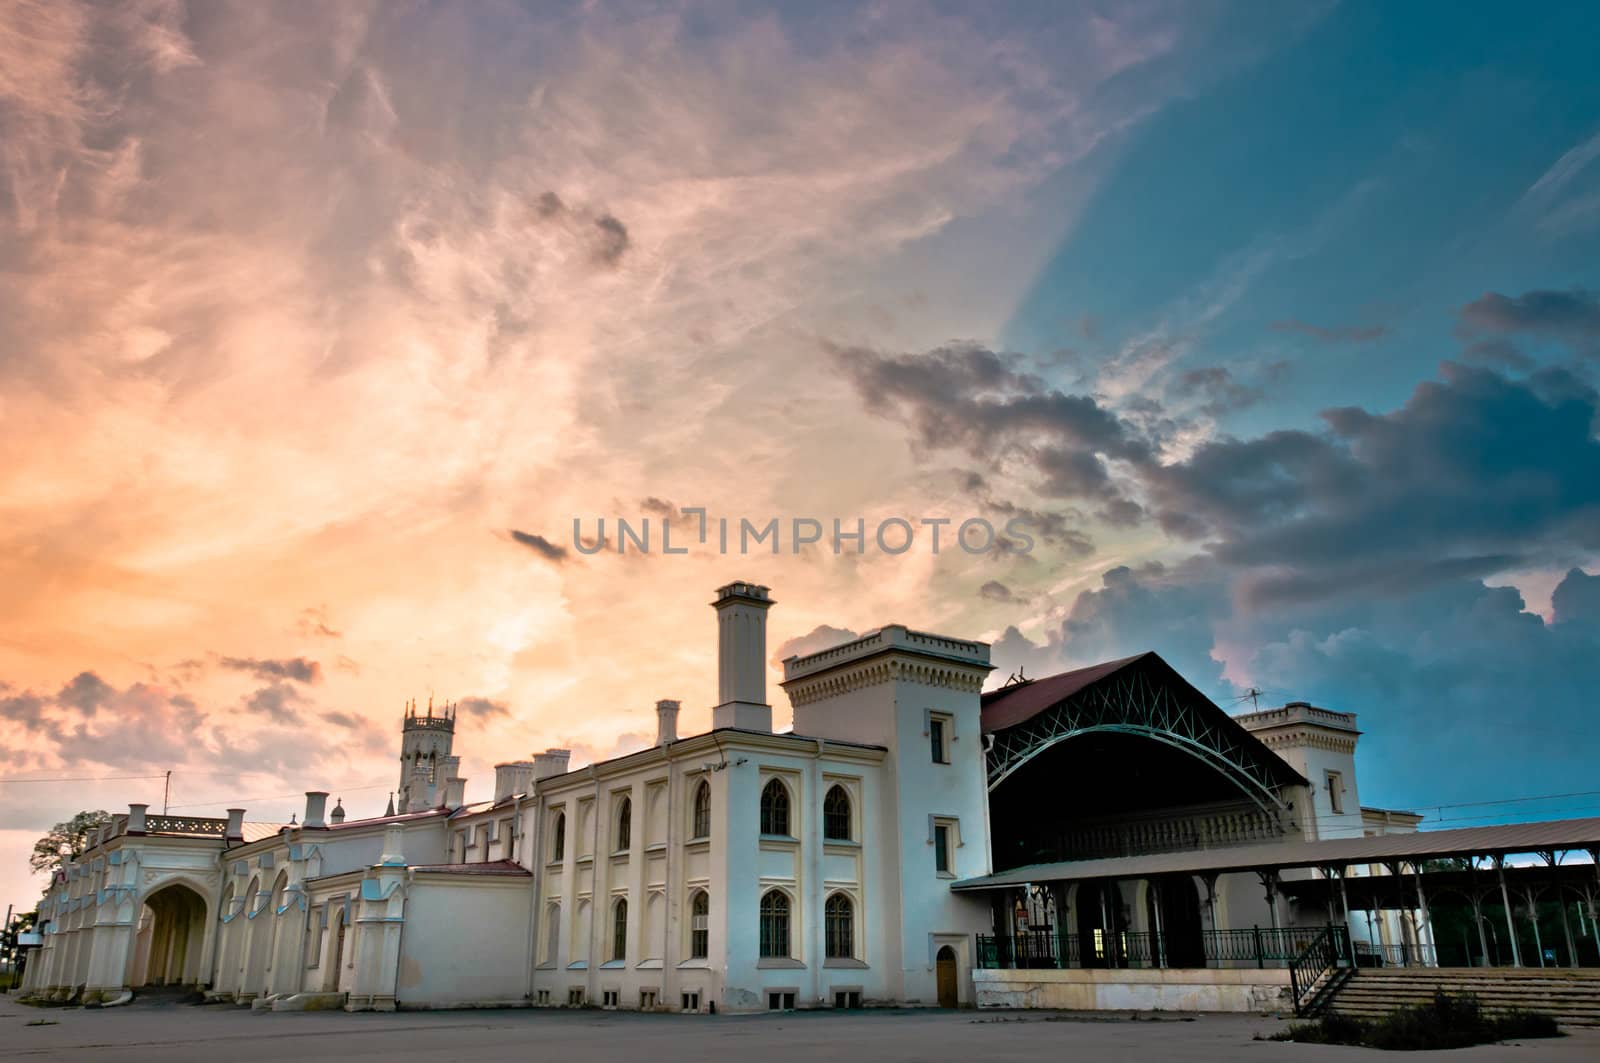 Old railway station with beautiful cloudscape by dmitryelagin